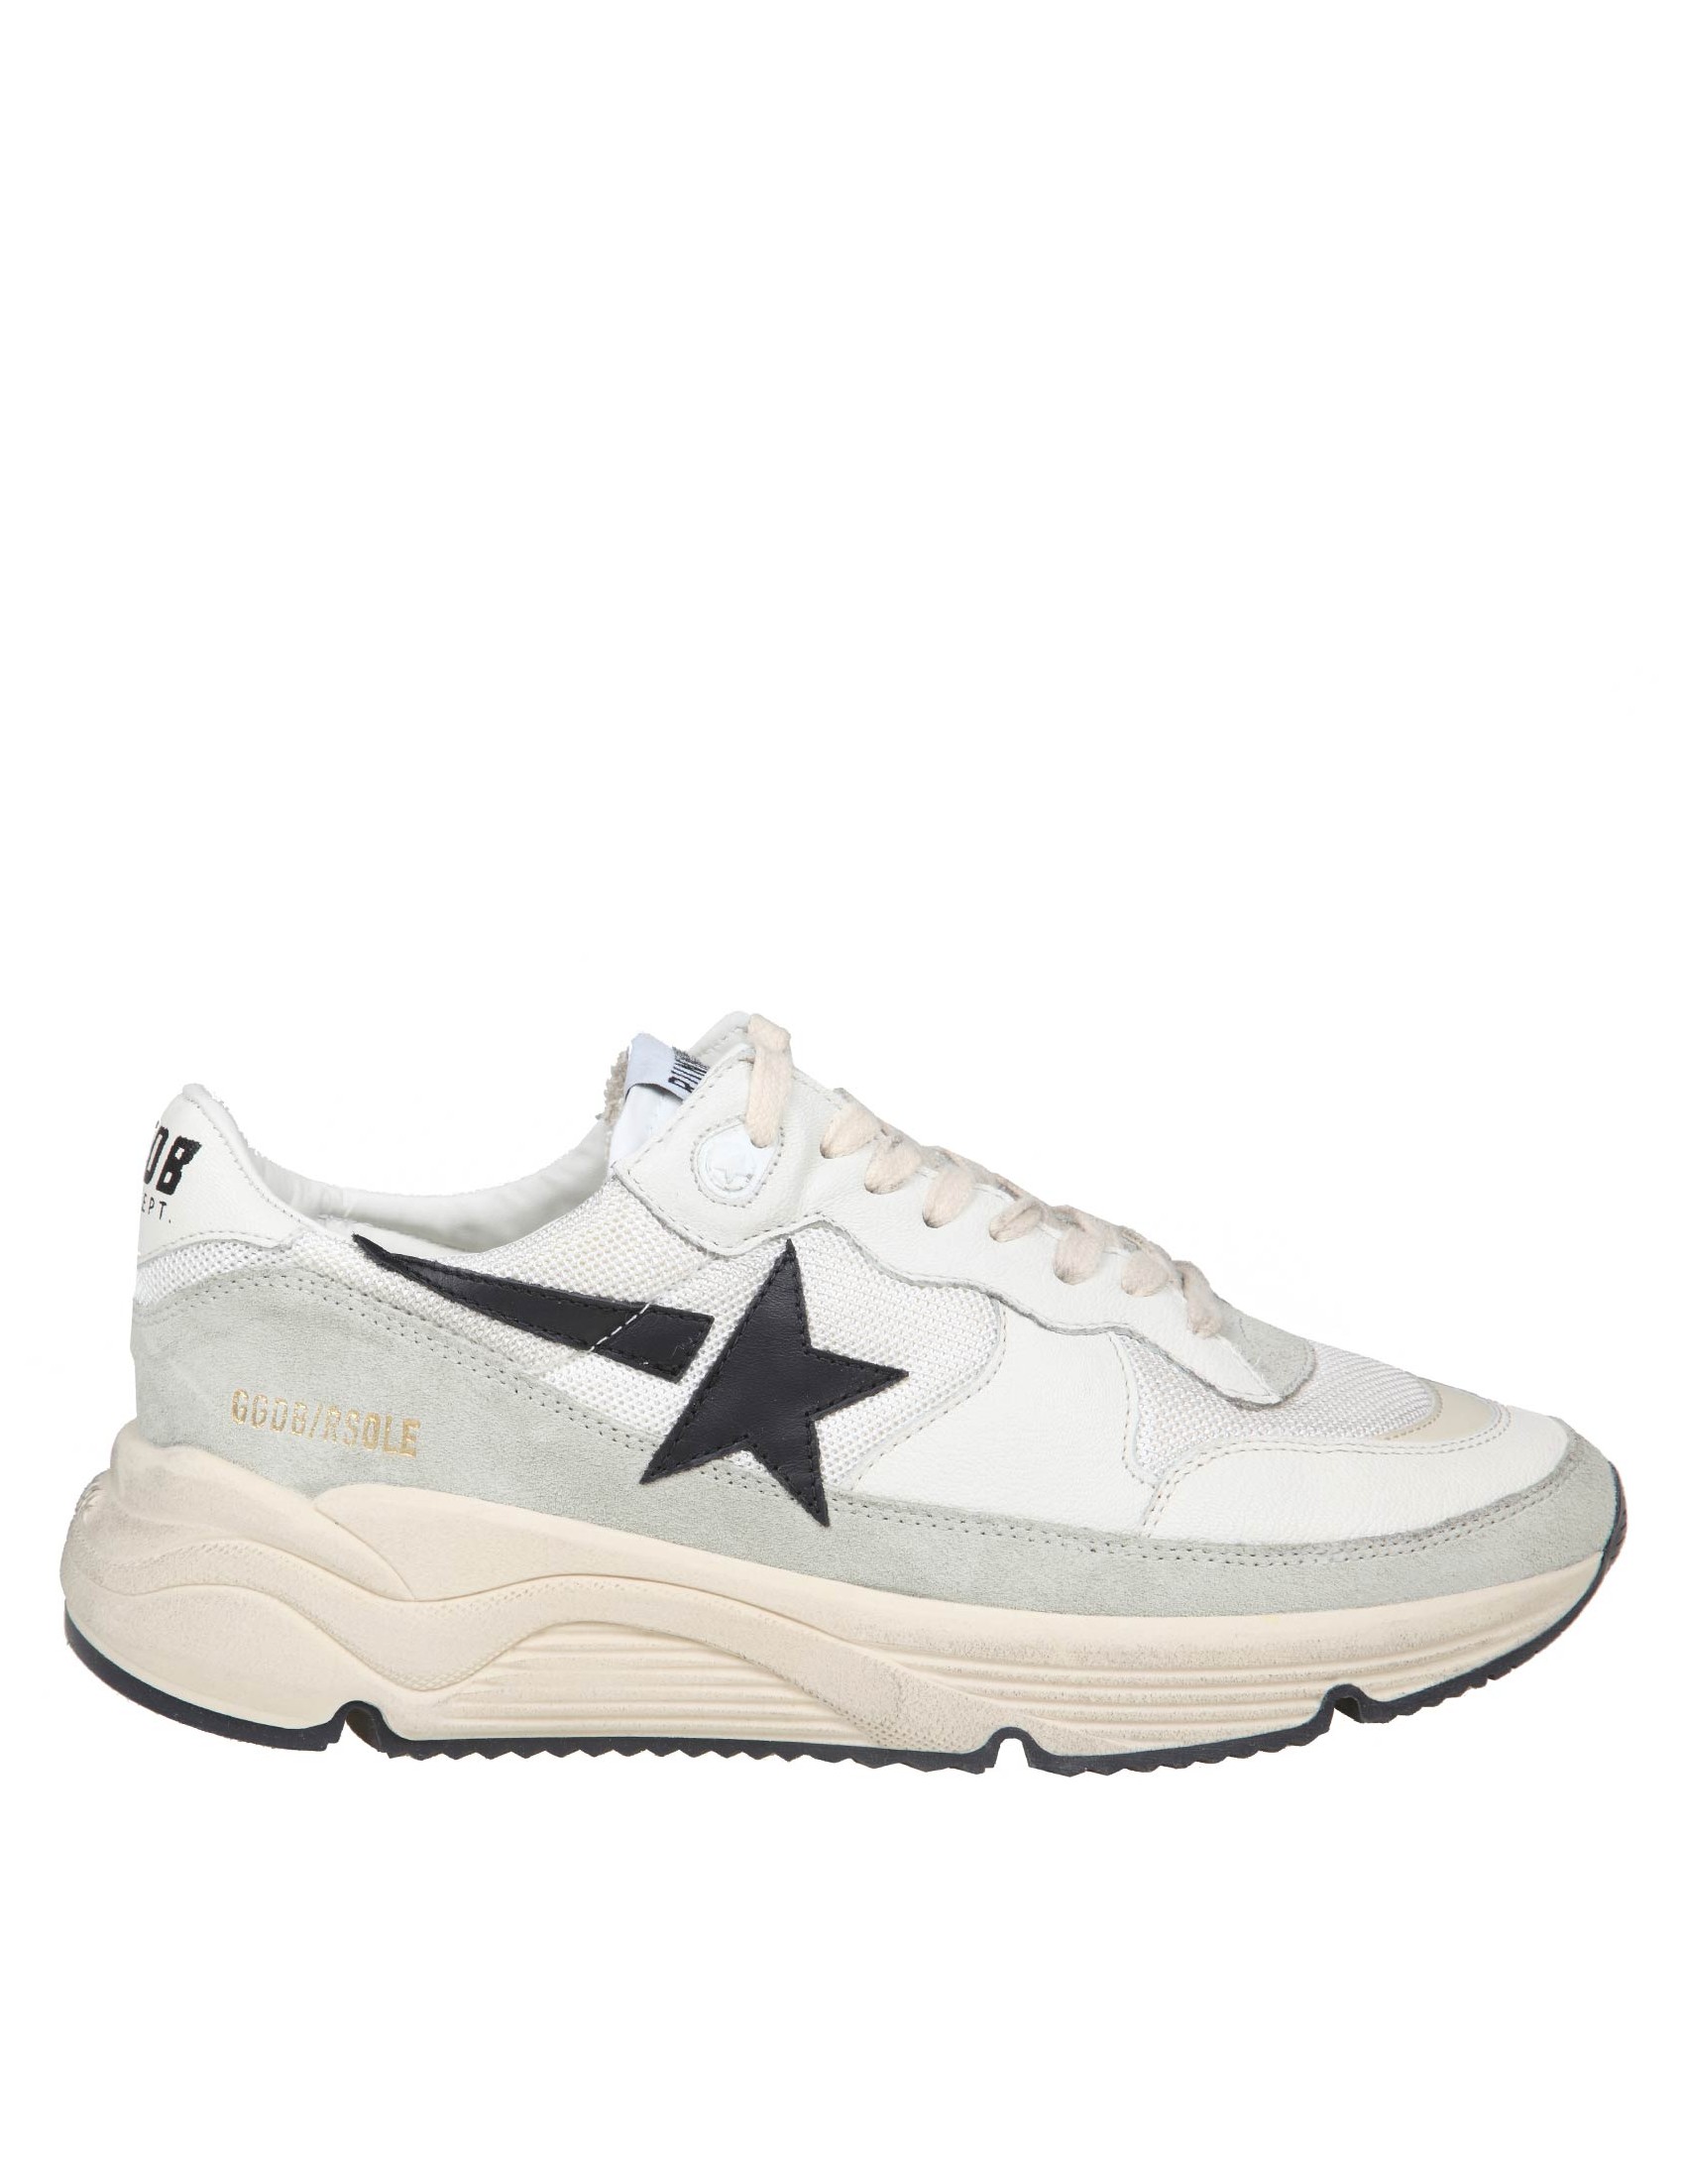 GOLDEN GOOSE RUNNING SOLE SNEAKERS IN BLACK AND WHITE LEATHER AND FABRIC